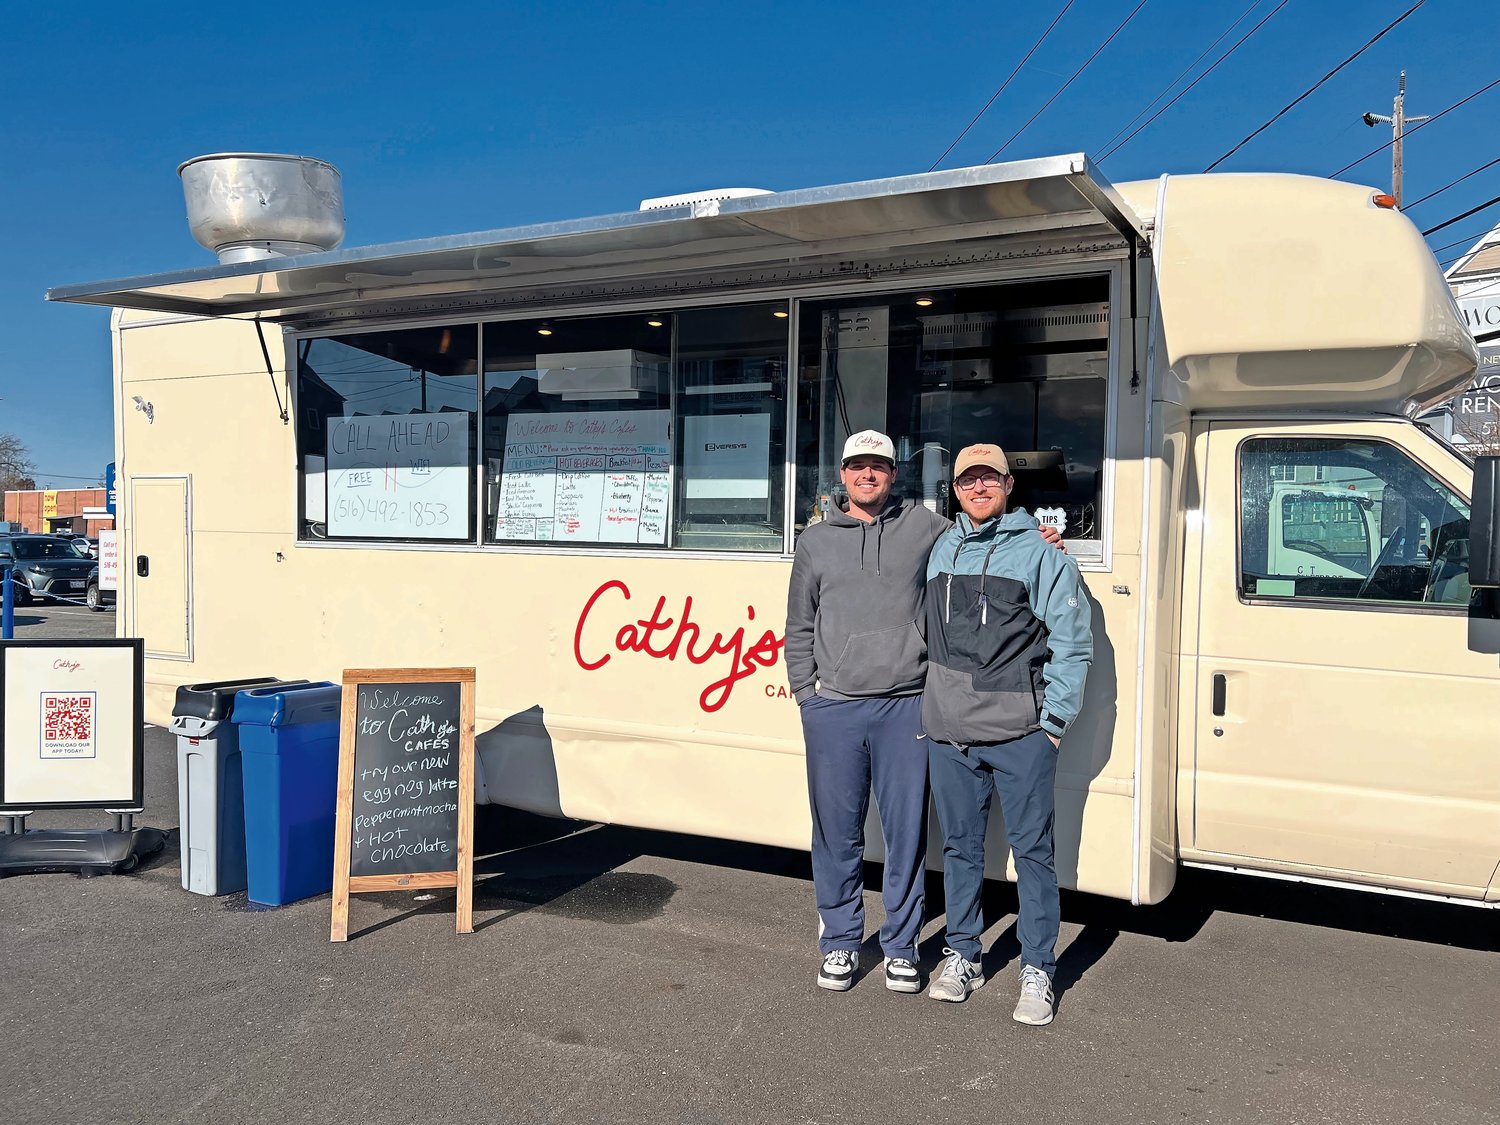 Tom Turner, left, and Matthew Gonyon, right, standing in front of their coffee truck business, Cathy’s Cafes.